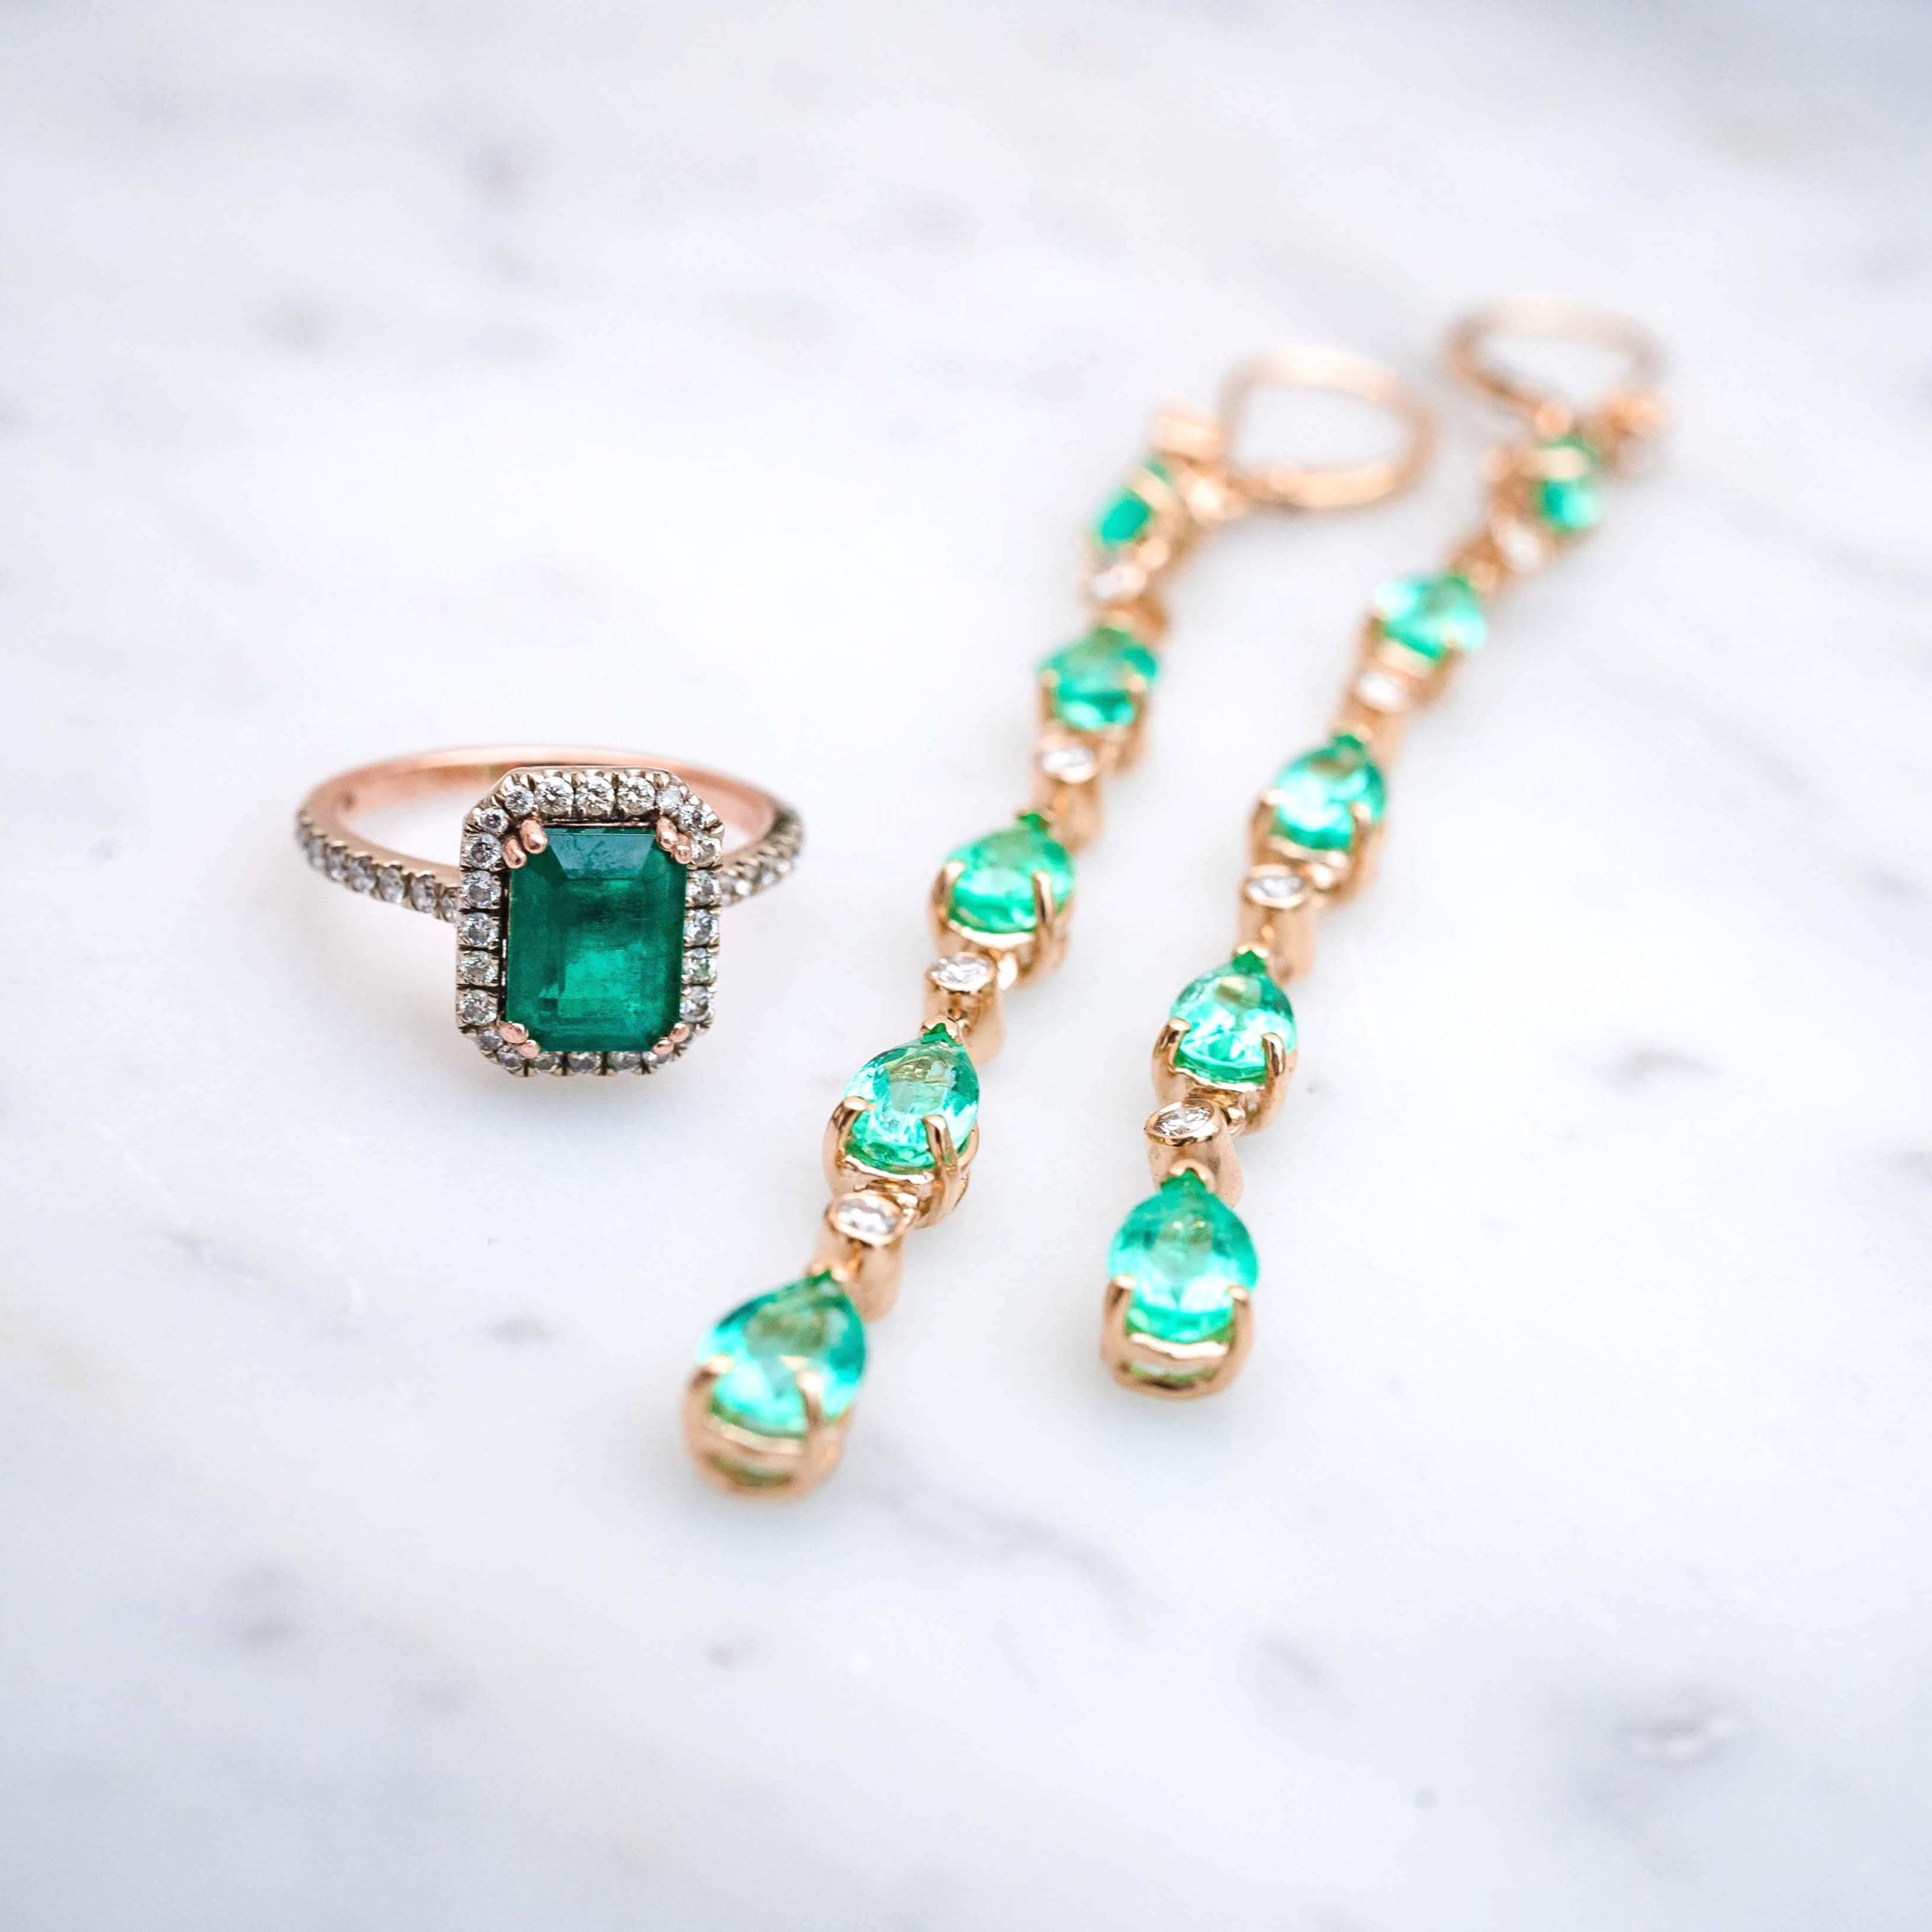 Emerald engagement ring set in white and rose gold beside a pair of 6 pear shaped emerald & diamond drop earrings also set in rose gold.